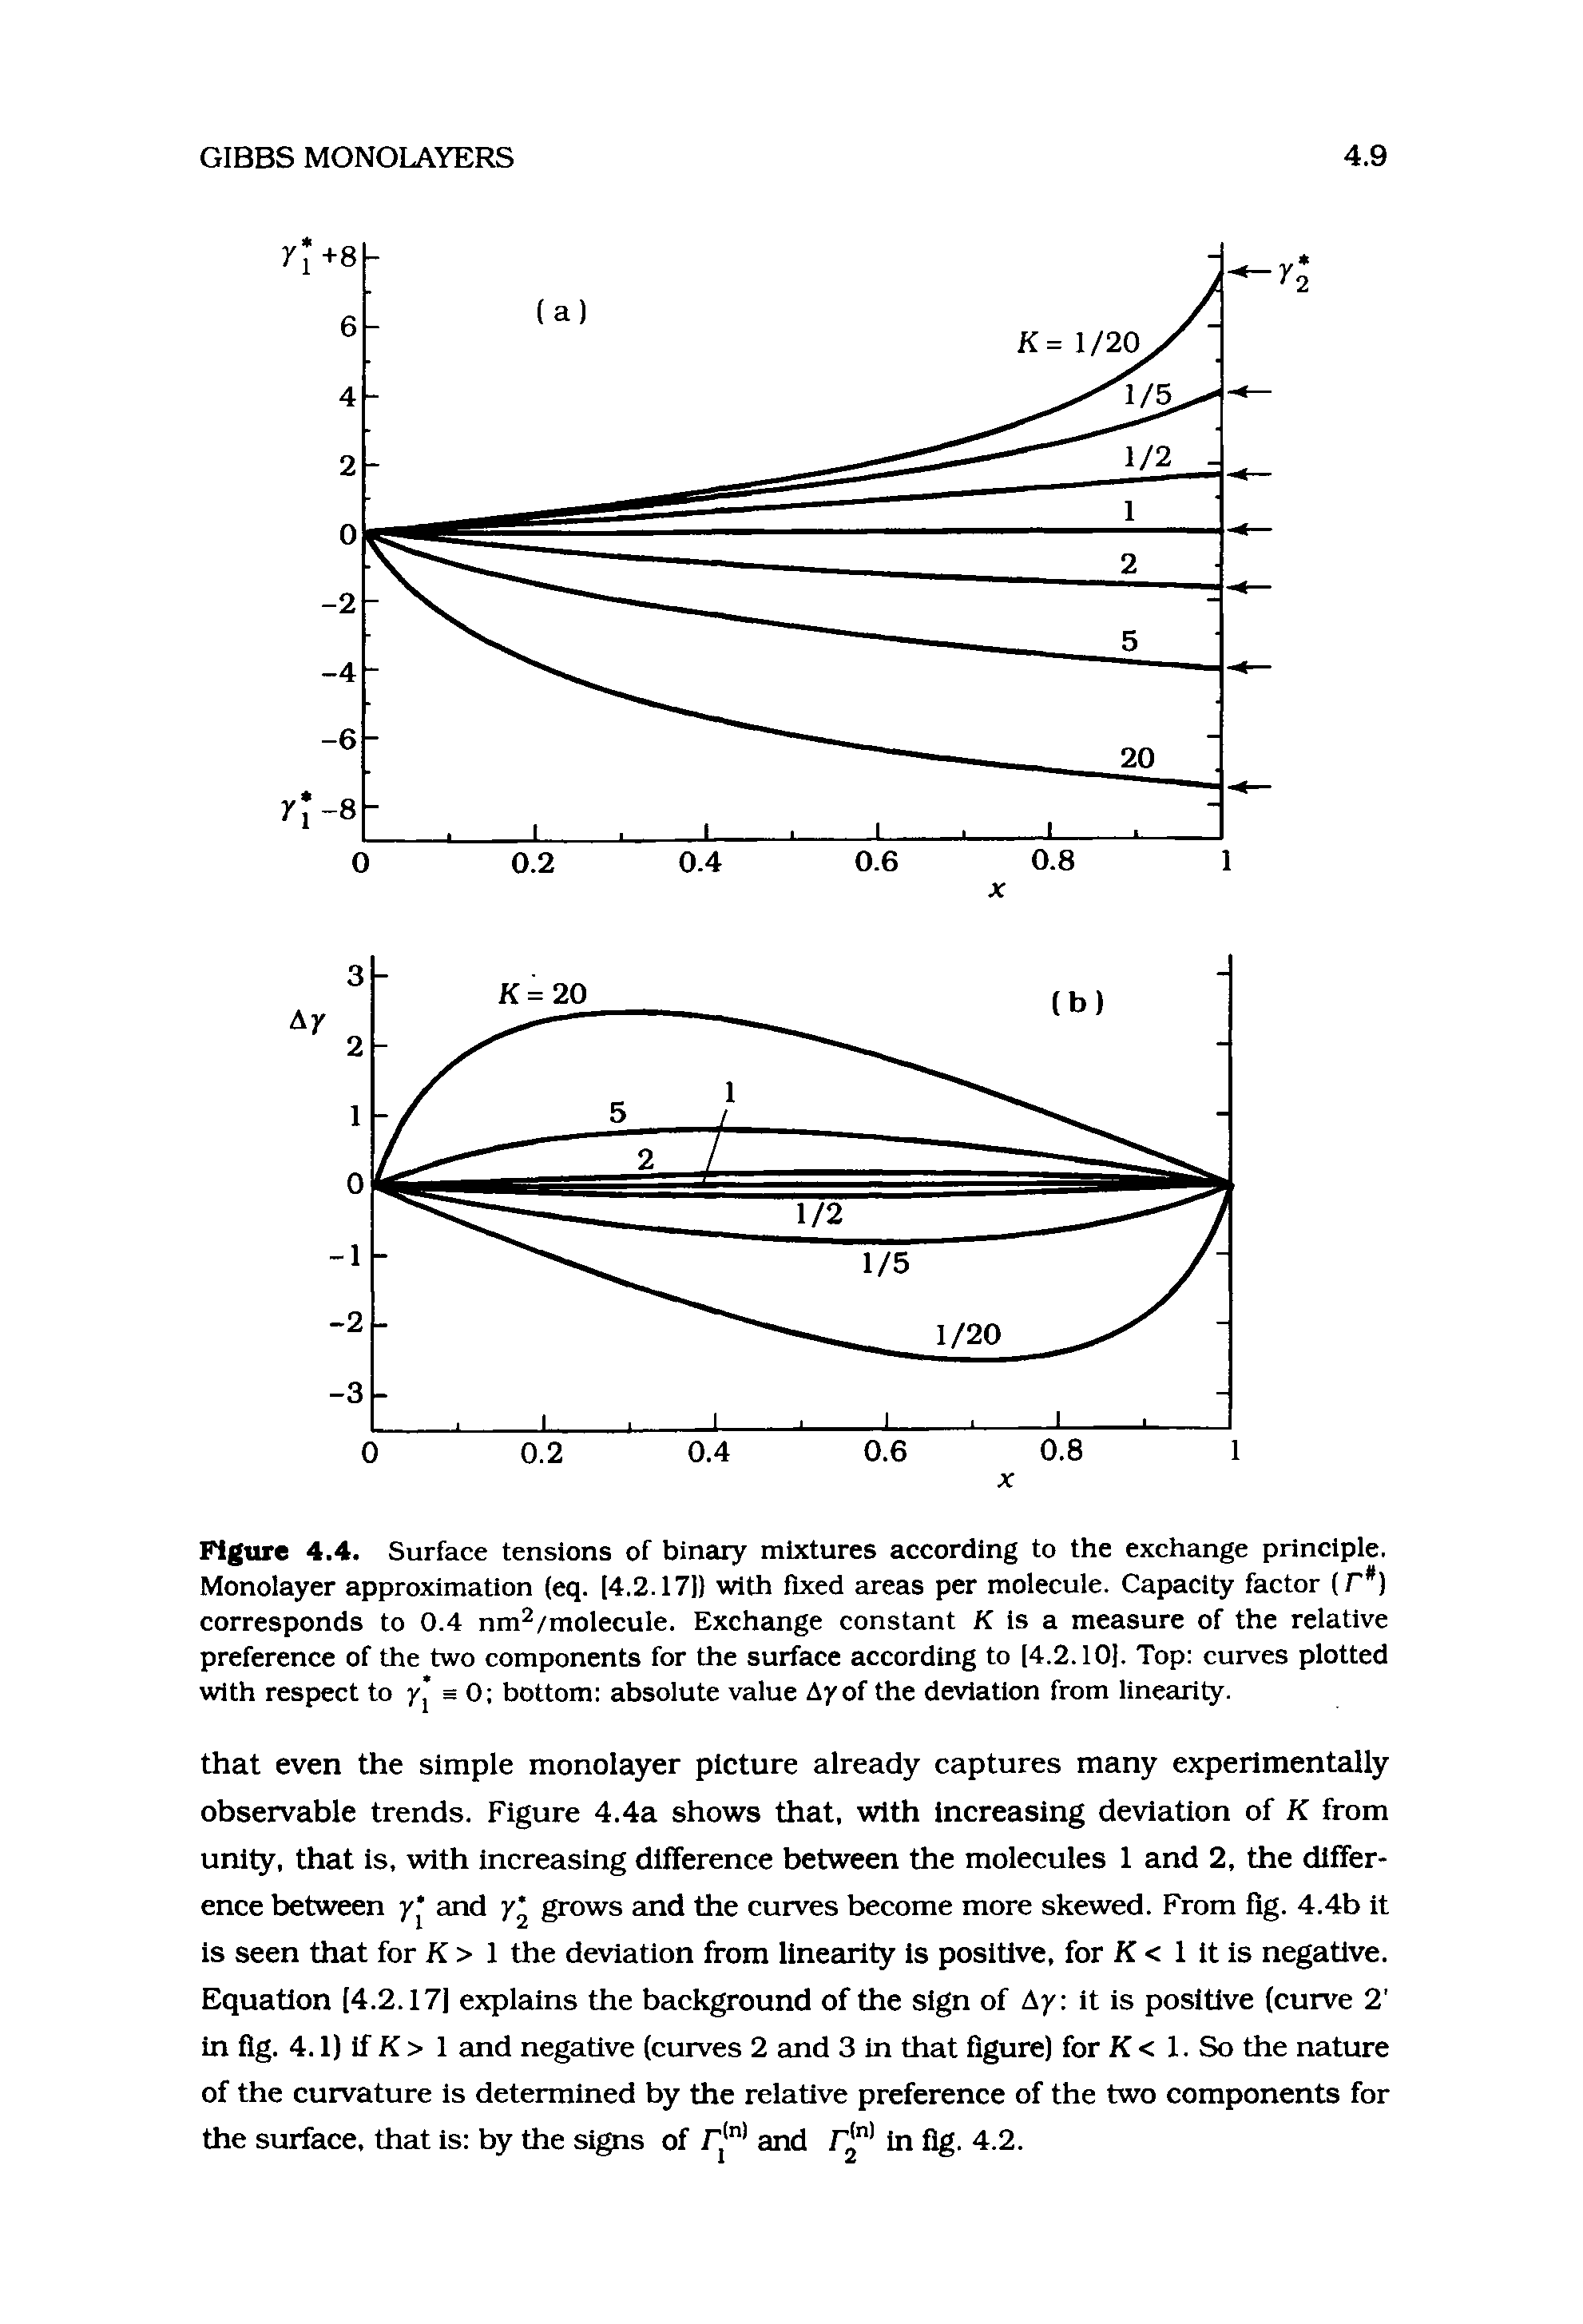 Figure 4.4. Surface tensions of binary mixtures according to the exchange principle. Monolayer approximation (eq. [4.2.17]) with fixed areas per molecule. Capacity factor (F ) corresponds to 0.4 nm /molecule. Exchange constant K is a measure of the relative preference of the two components for the surface according to [4.2.10]. Top curves plotted with respect to y s 0 bottom absolute value Ay of the deviation from linearity.